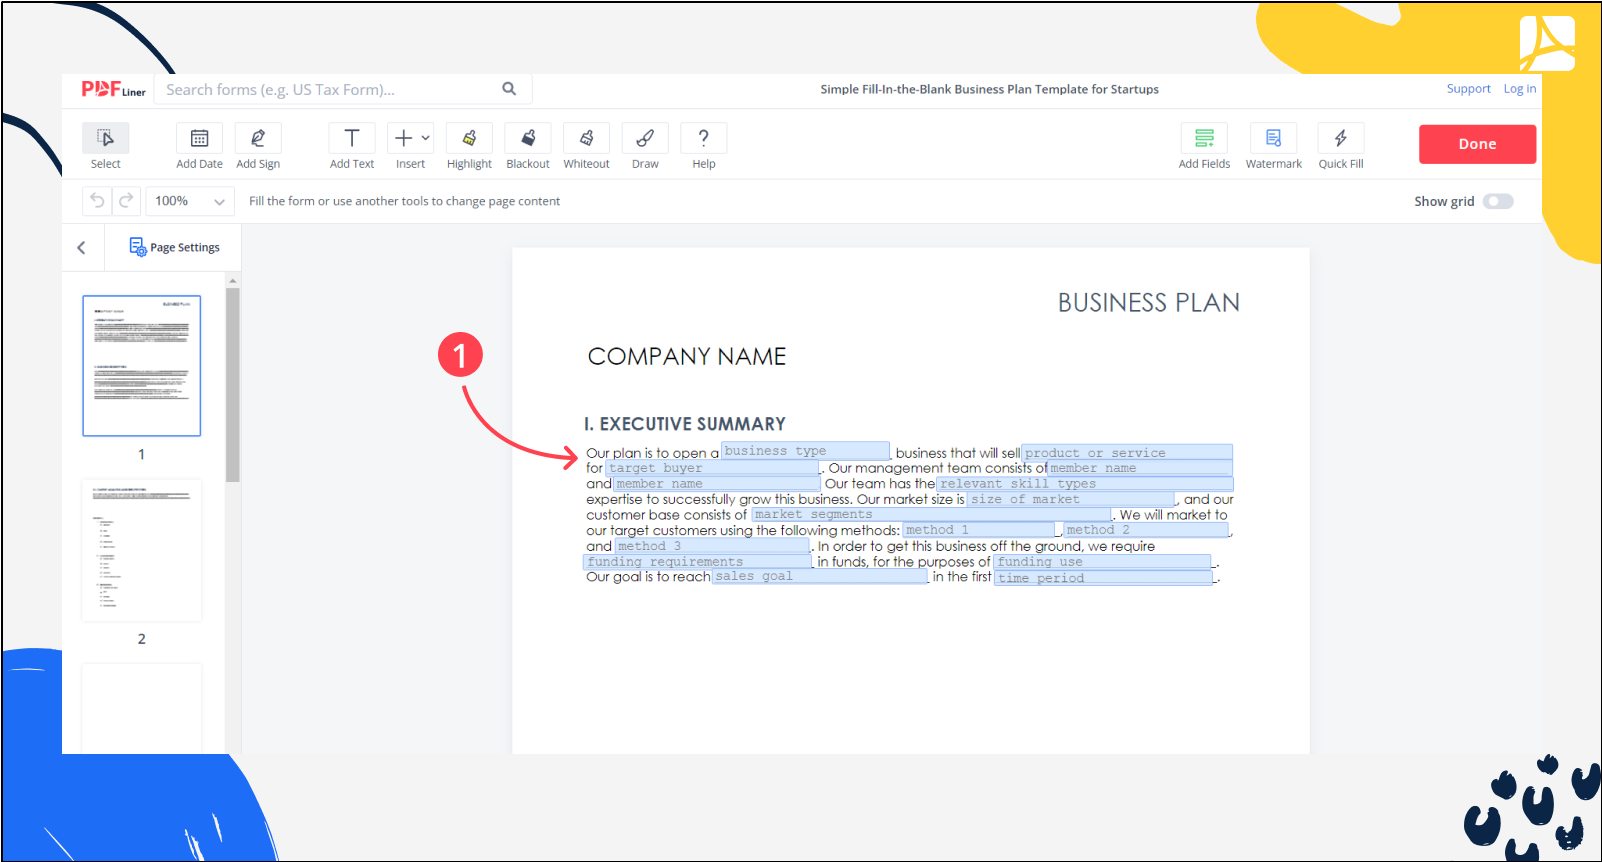 Simple Fill-In-the-Blank Business Plan Template for Startups screenshot step 1